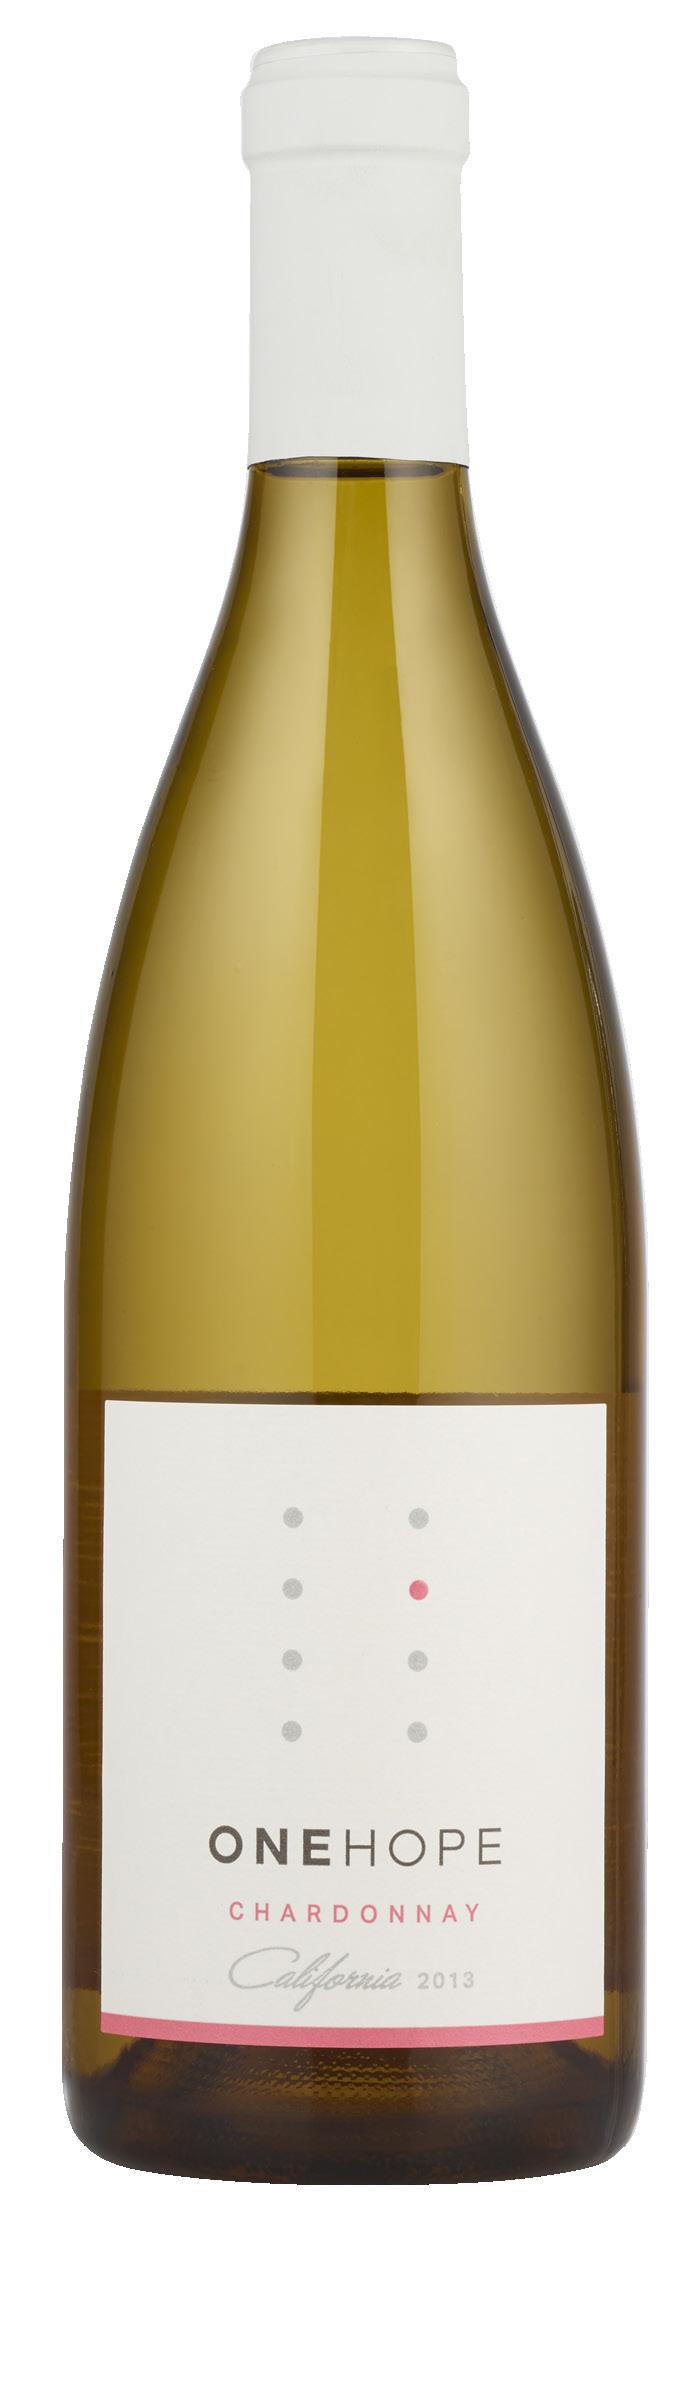 ONEHOPE CALIFORNIA CHARDONNAY smooth oak crisp green apple delicate vanilla toasted coconut Aromas of green apples, pear, and aromatic baking spices.